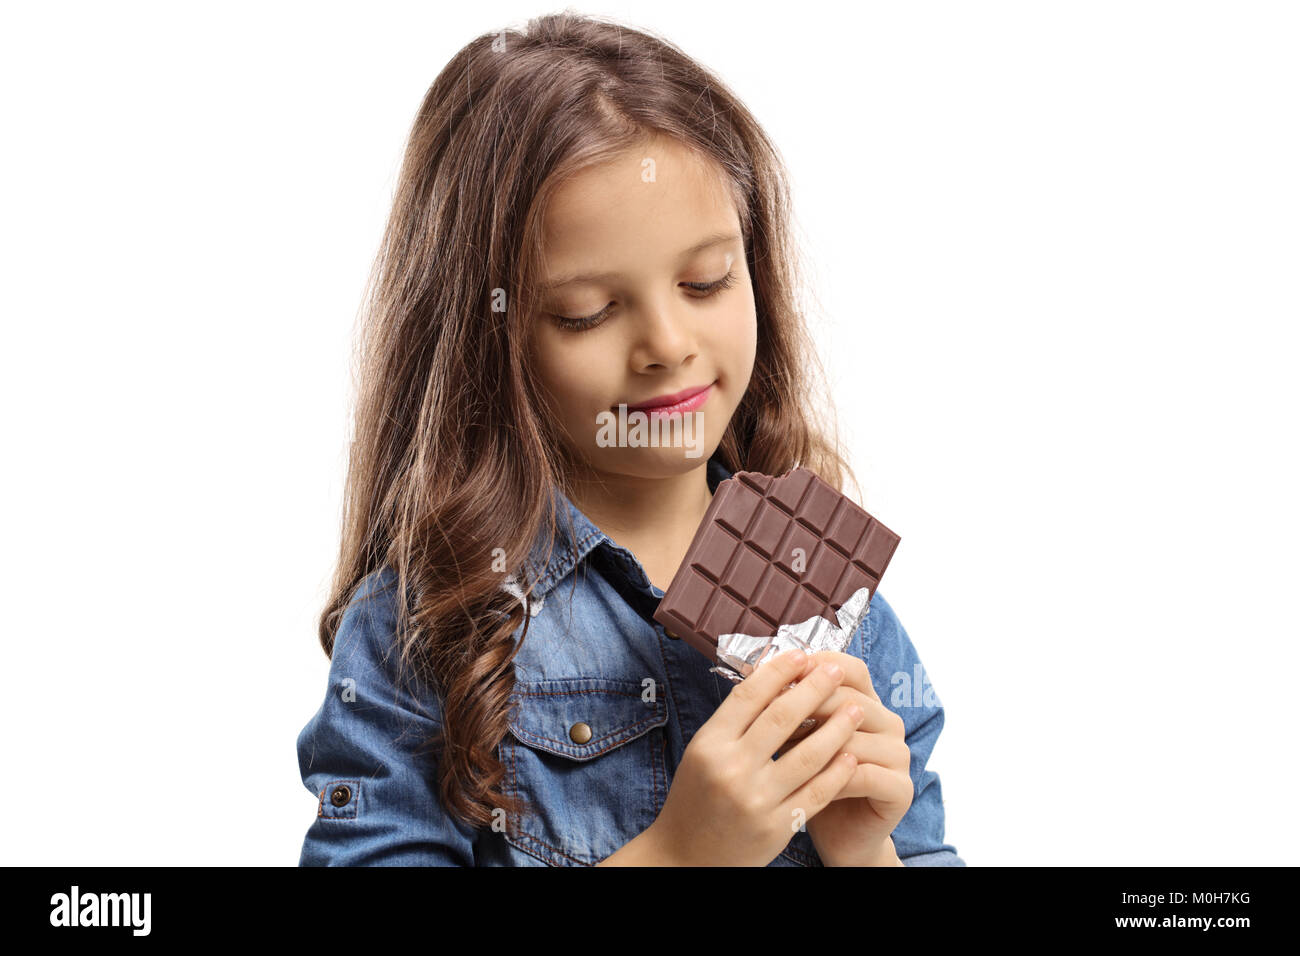 Girl with a chocolate bar isolated on white background Stock Photo